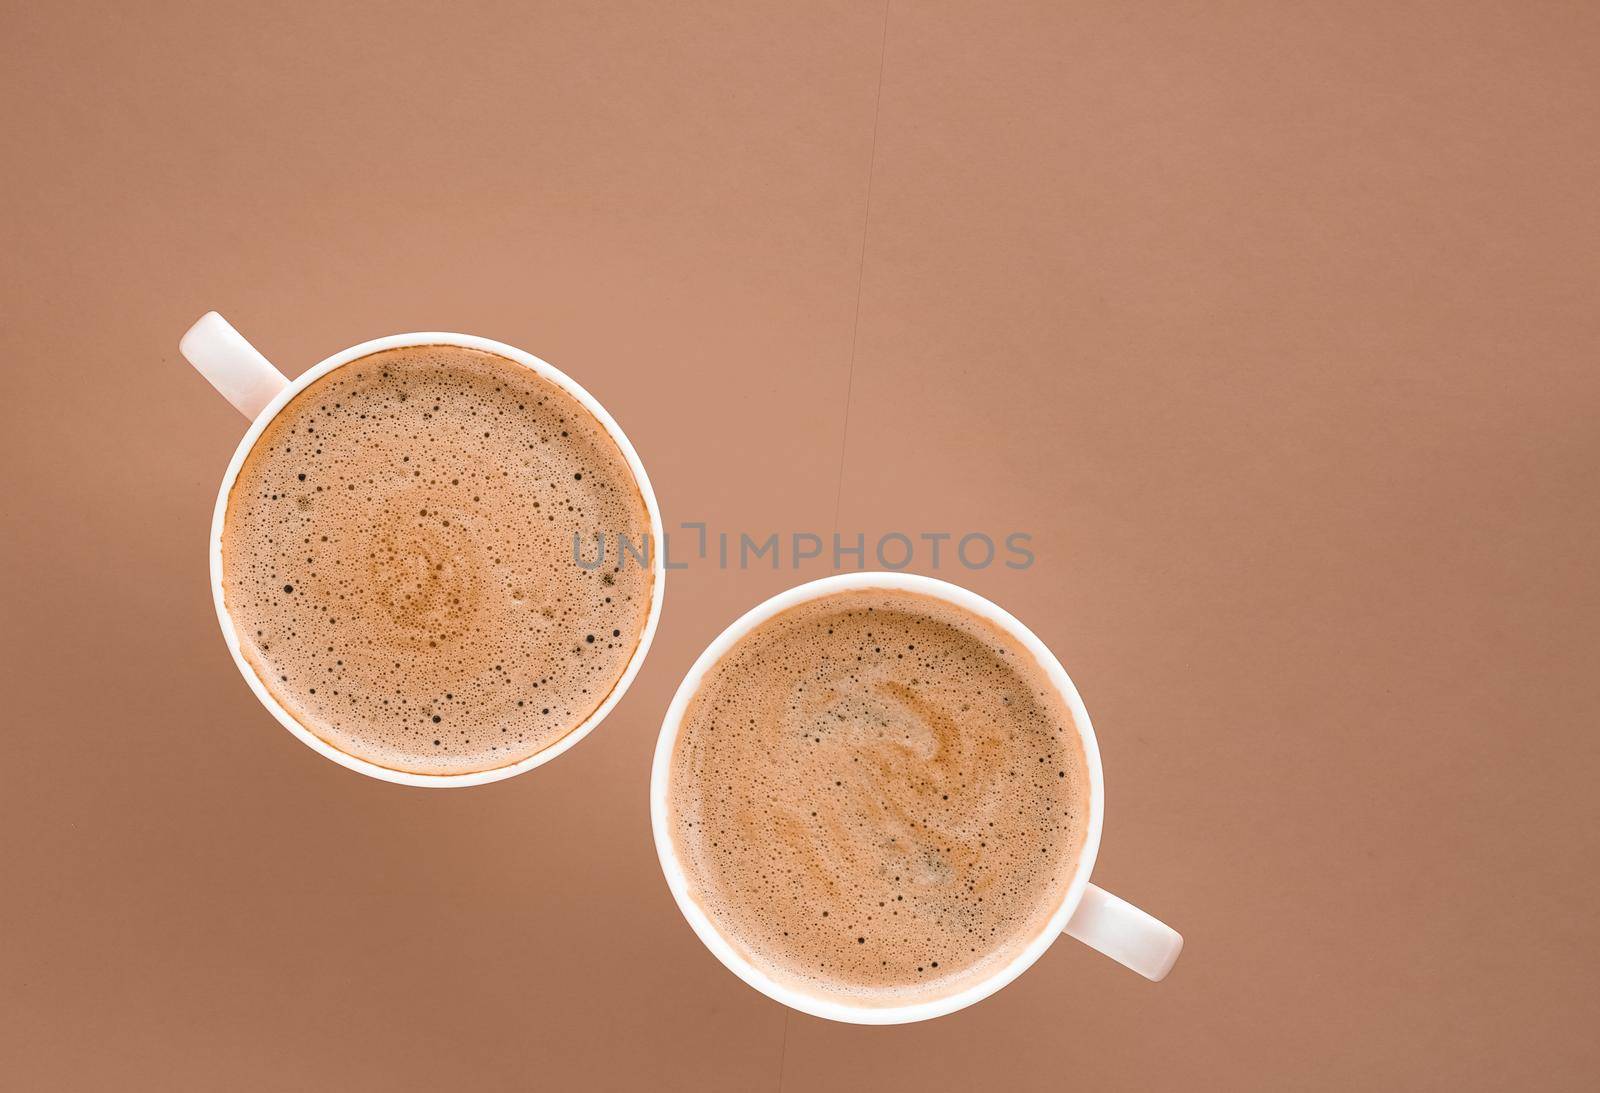 Drinks menu, italian espresso recipe and organic shop concept - Cup of hot coffee as breakfast drink, flatlay cups on beige background